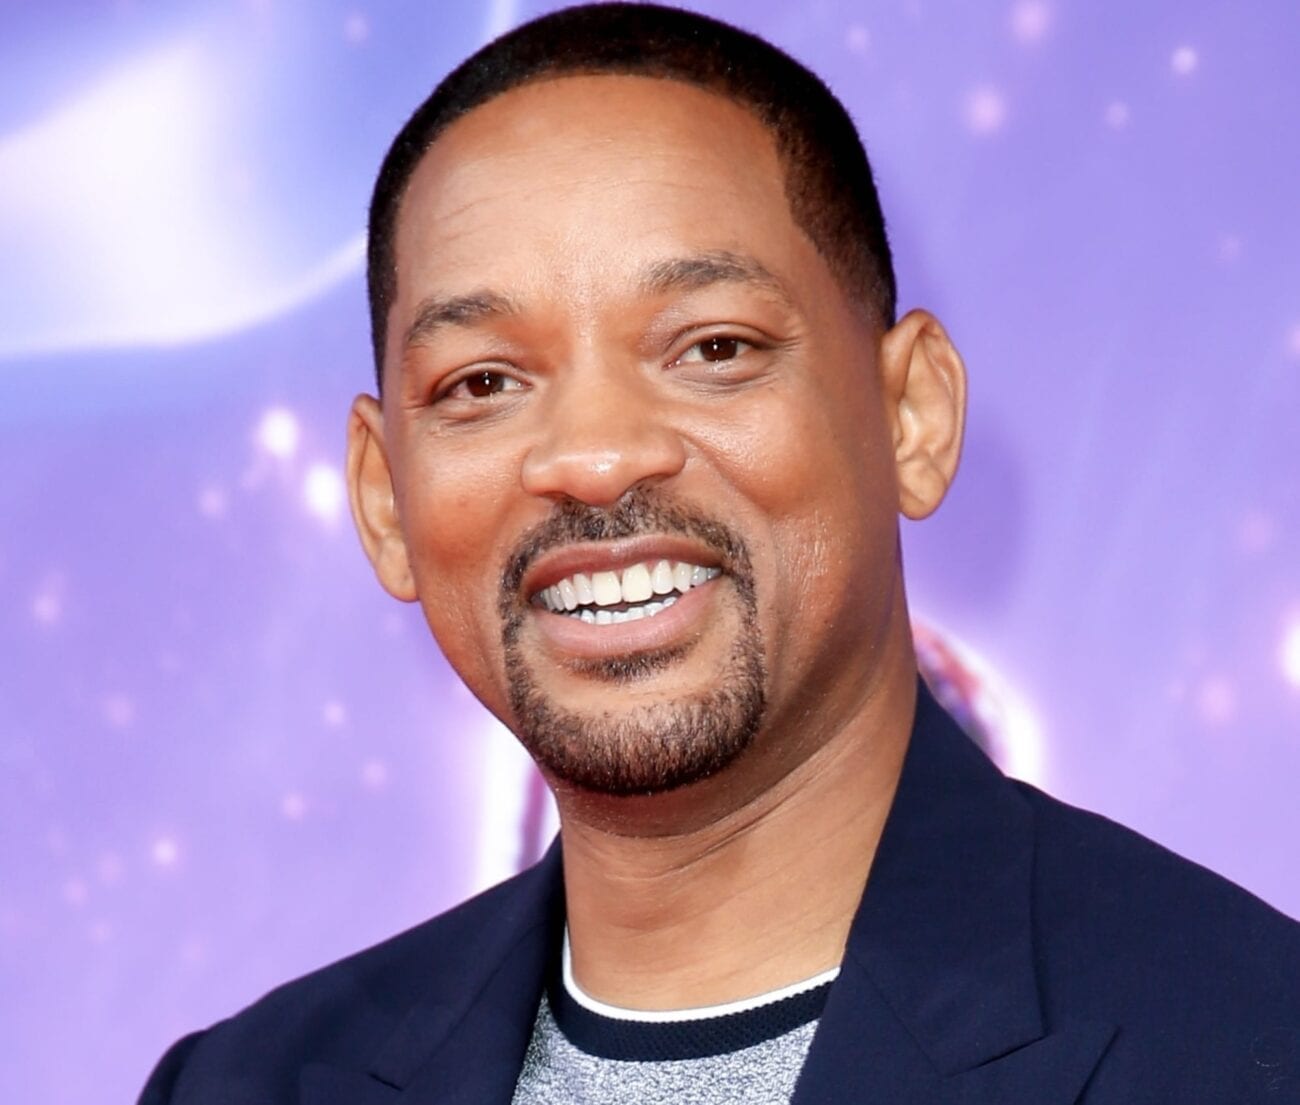 Did you know that the Fresh Prince isn't just rolling in royalties? Will Smith is actually filthy rich! Take a look at Will Smith's enormous net worth.